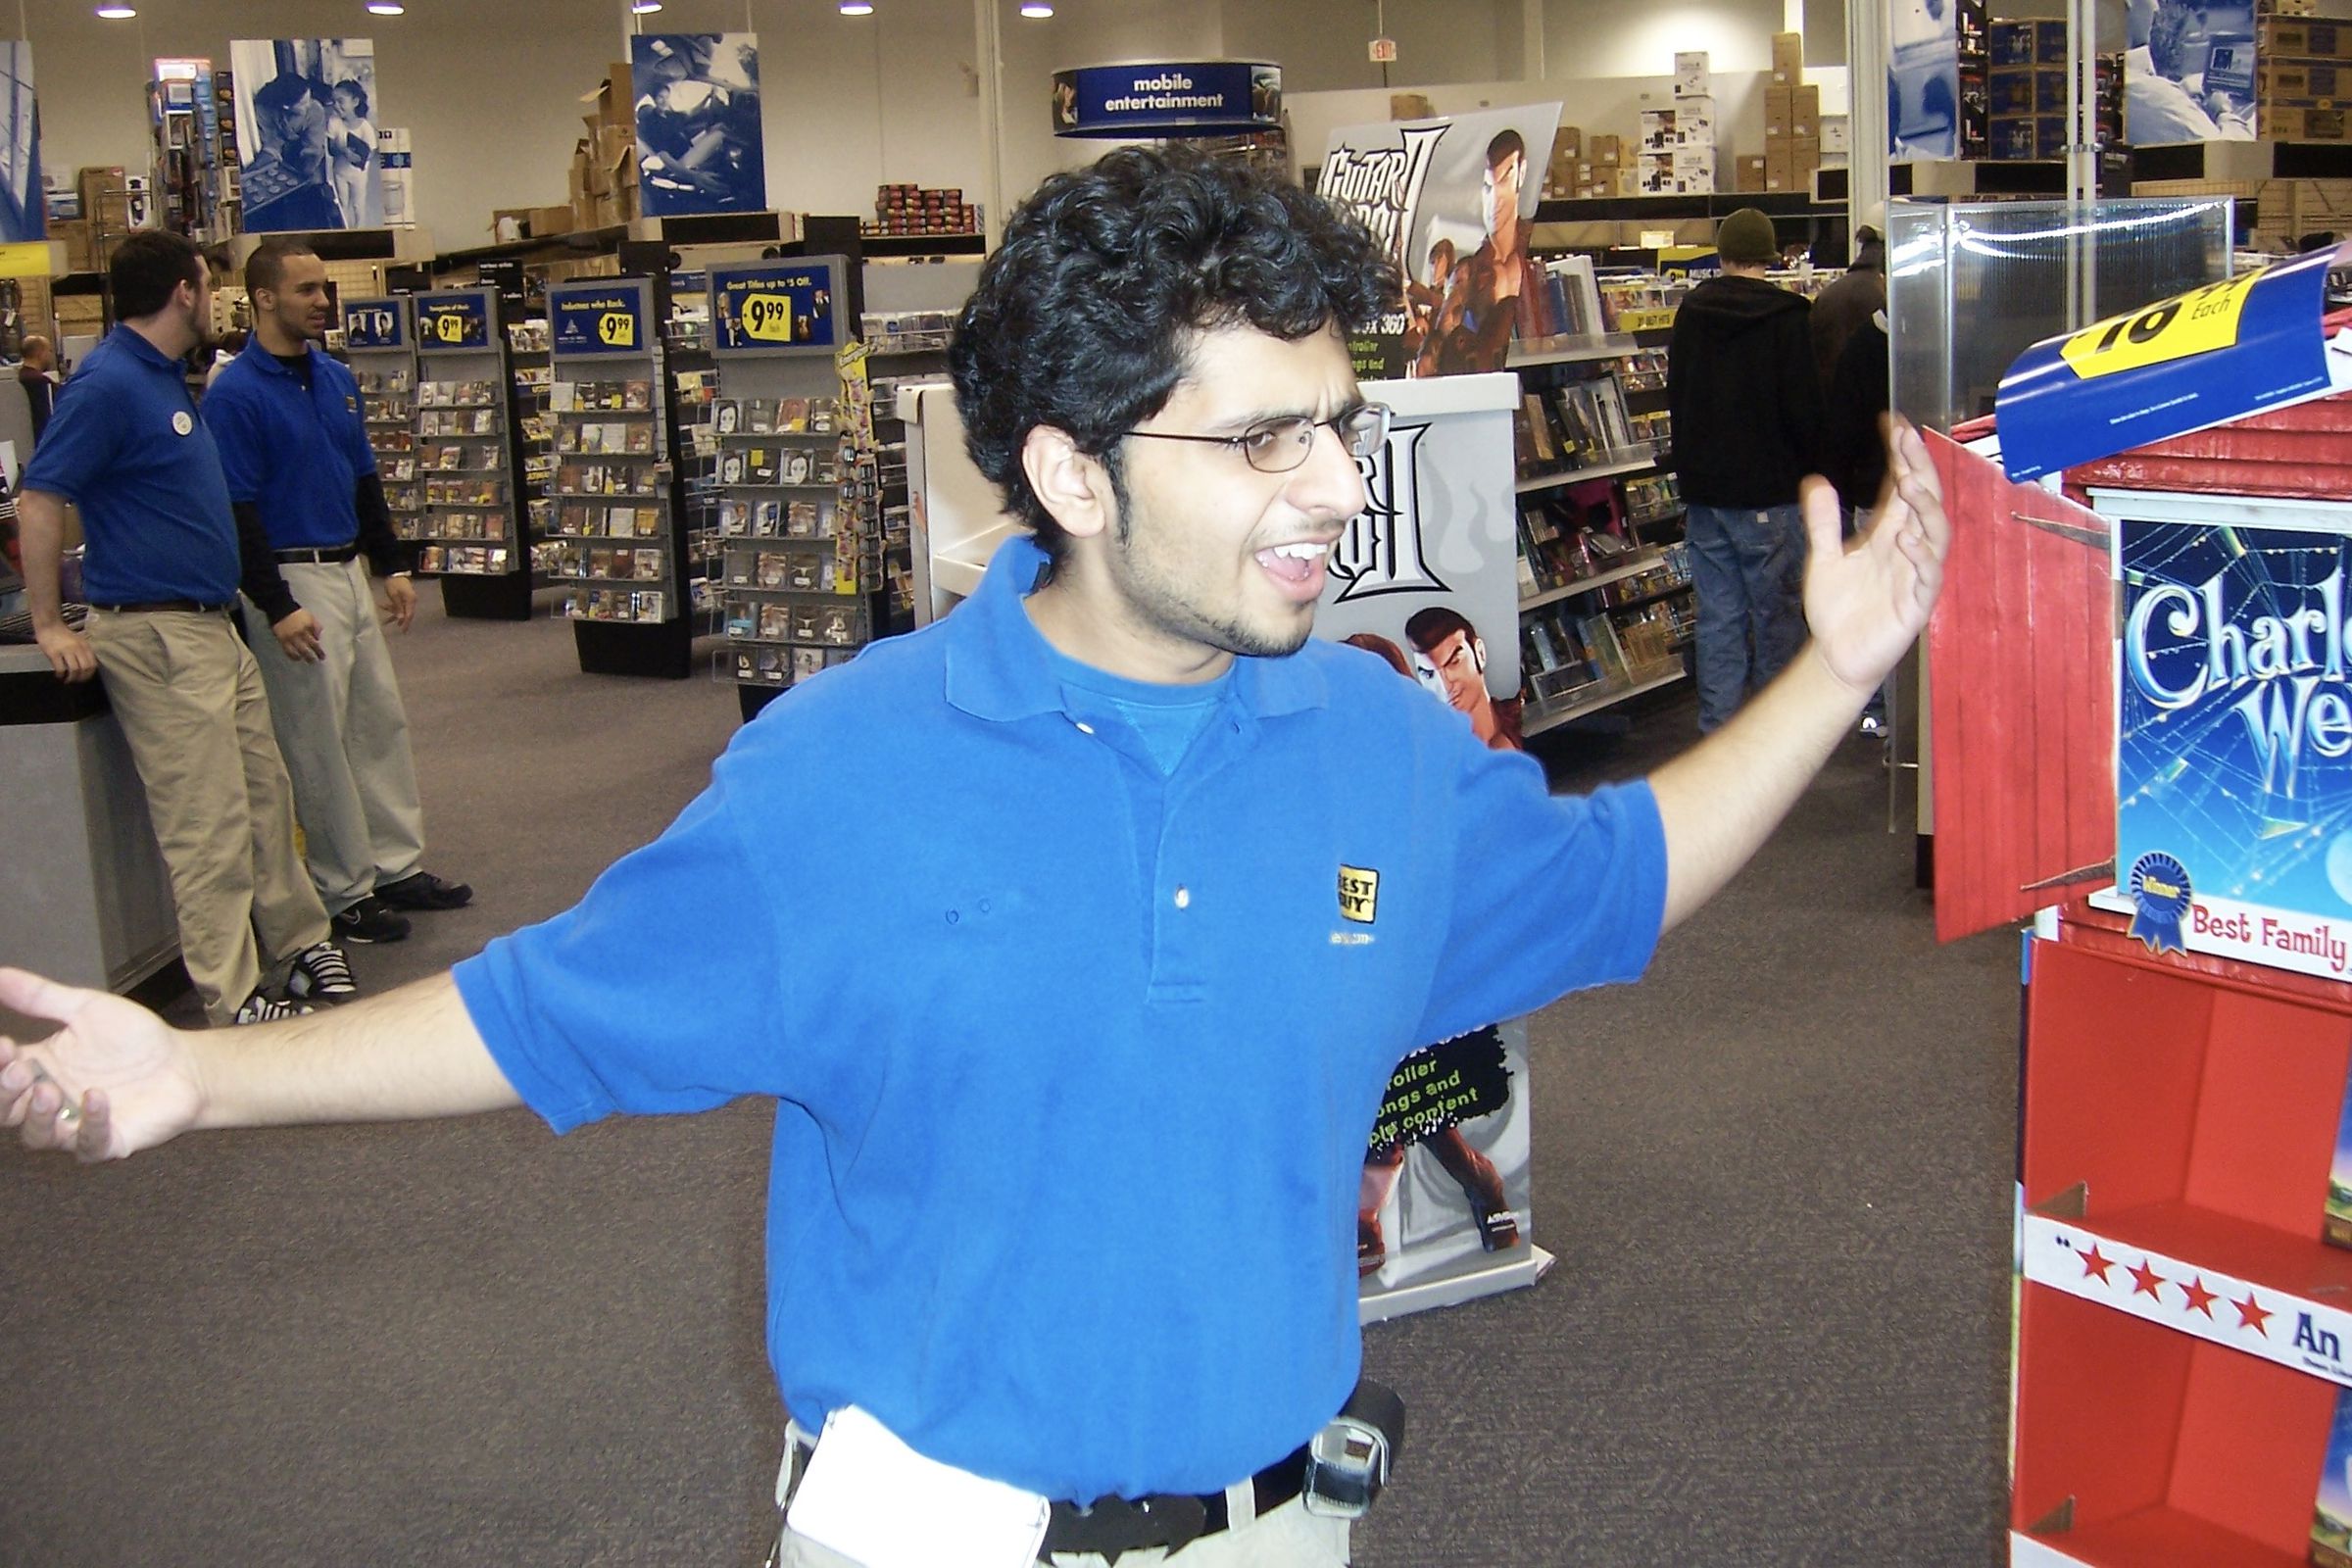 Best Buy employee in blue shirt standing in front of a Guitar Hero 2 stand and movie and CD aisles in the back, employee waving arms